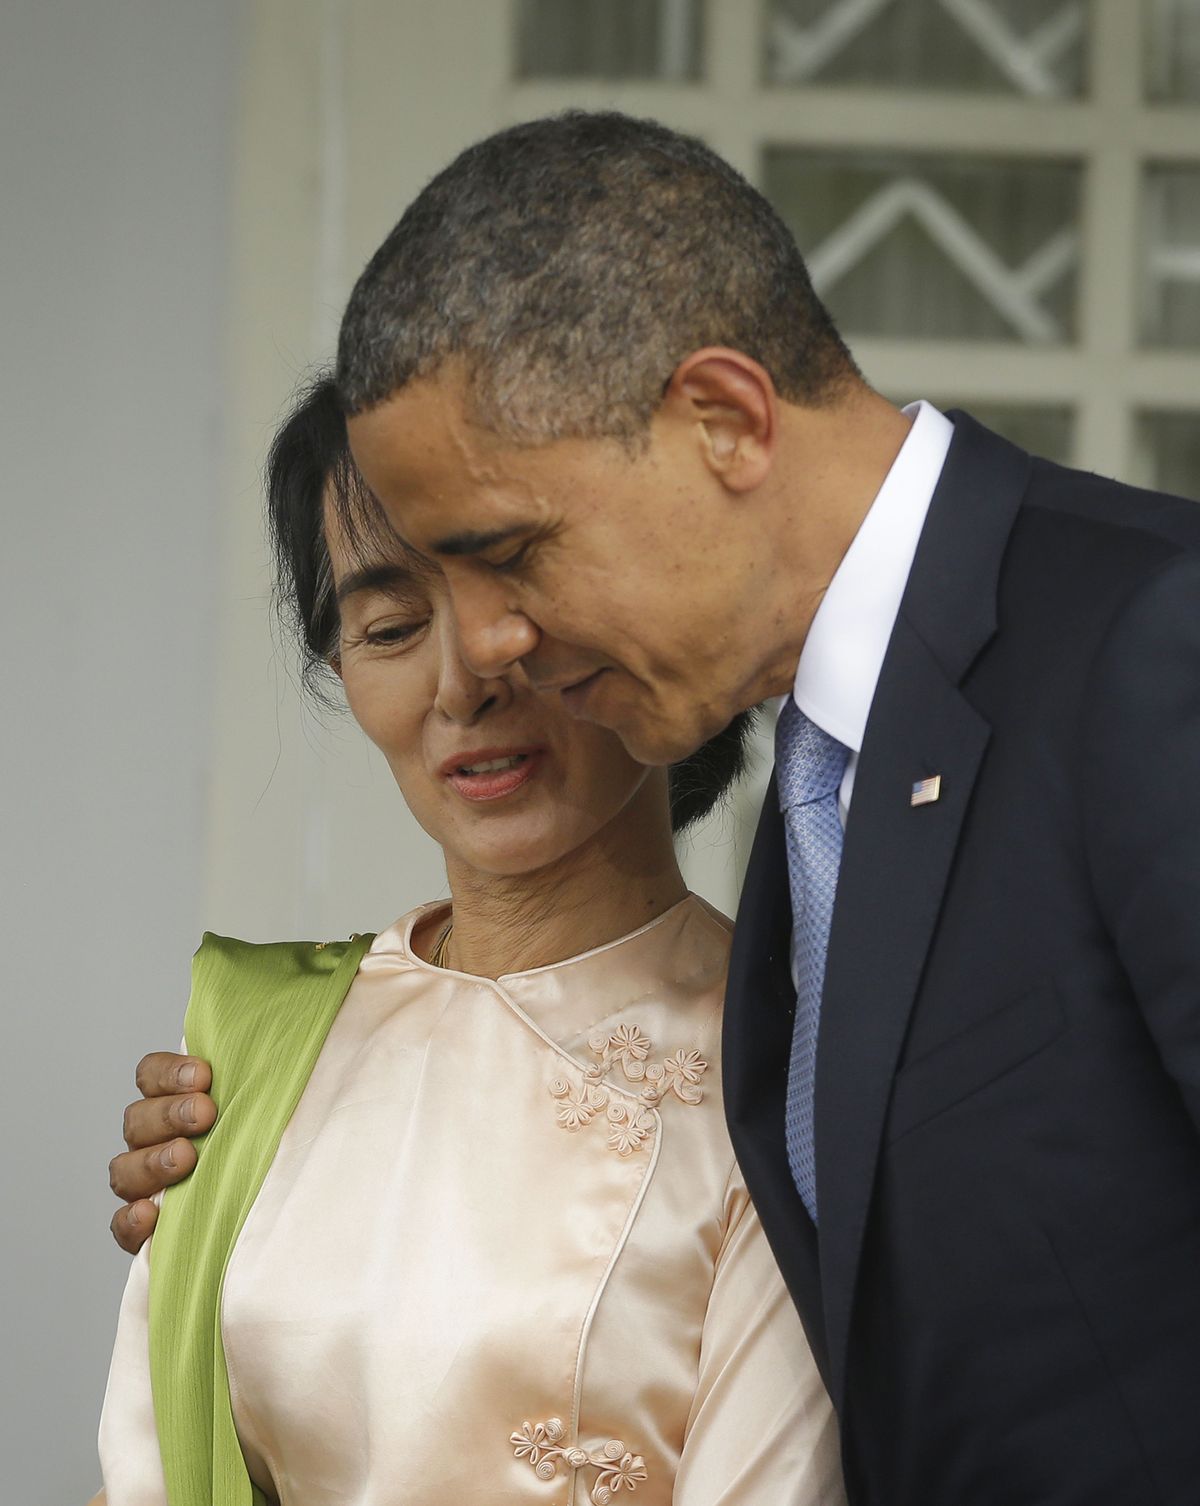 U.S. President Barack Obama, right, walks out with Myanmar opposition leader Aung San Suu Kyi after addressing members of the media at Suu Kyi